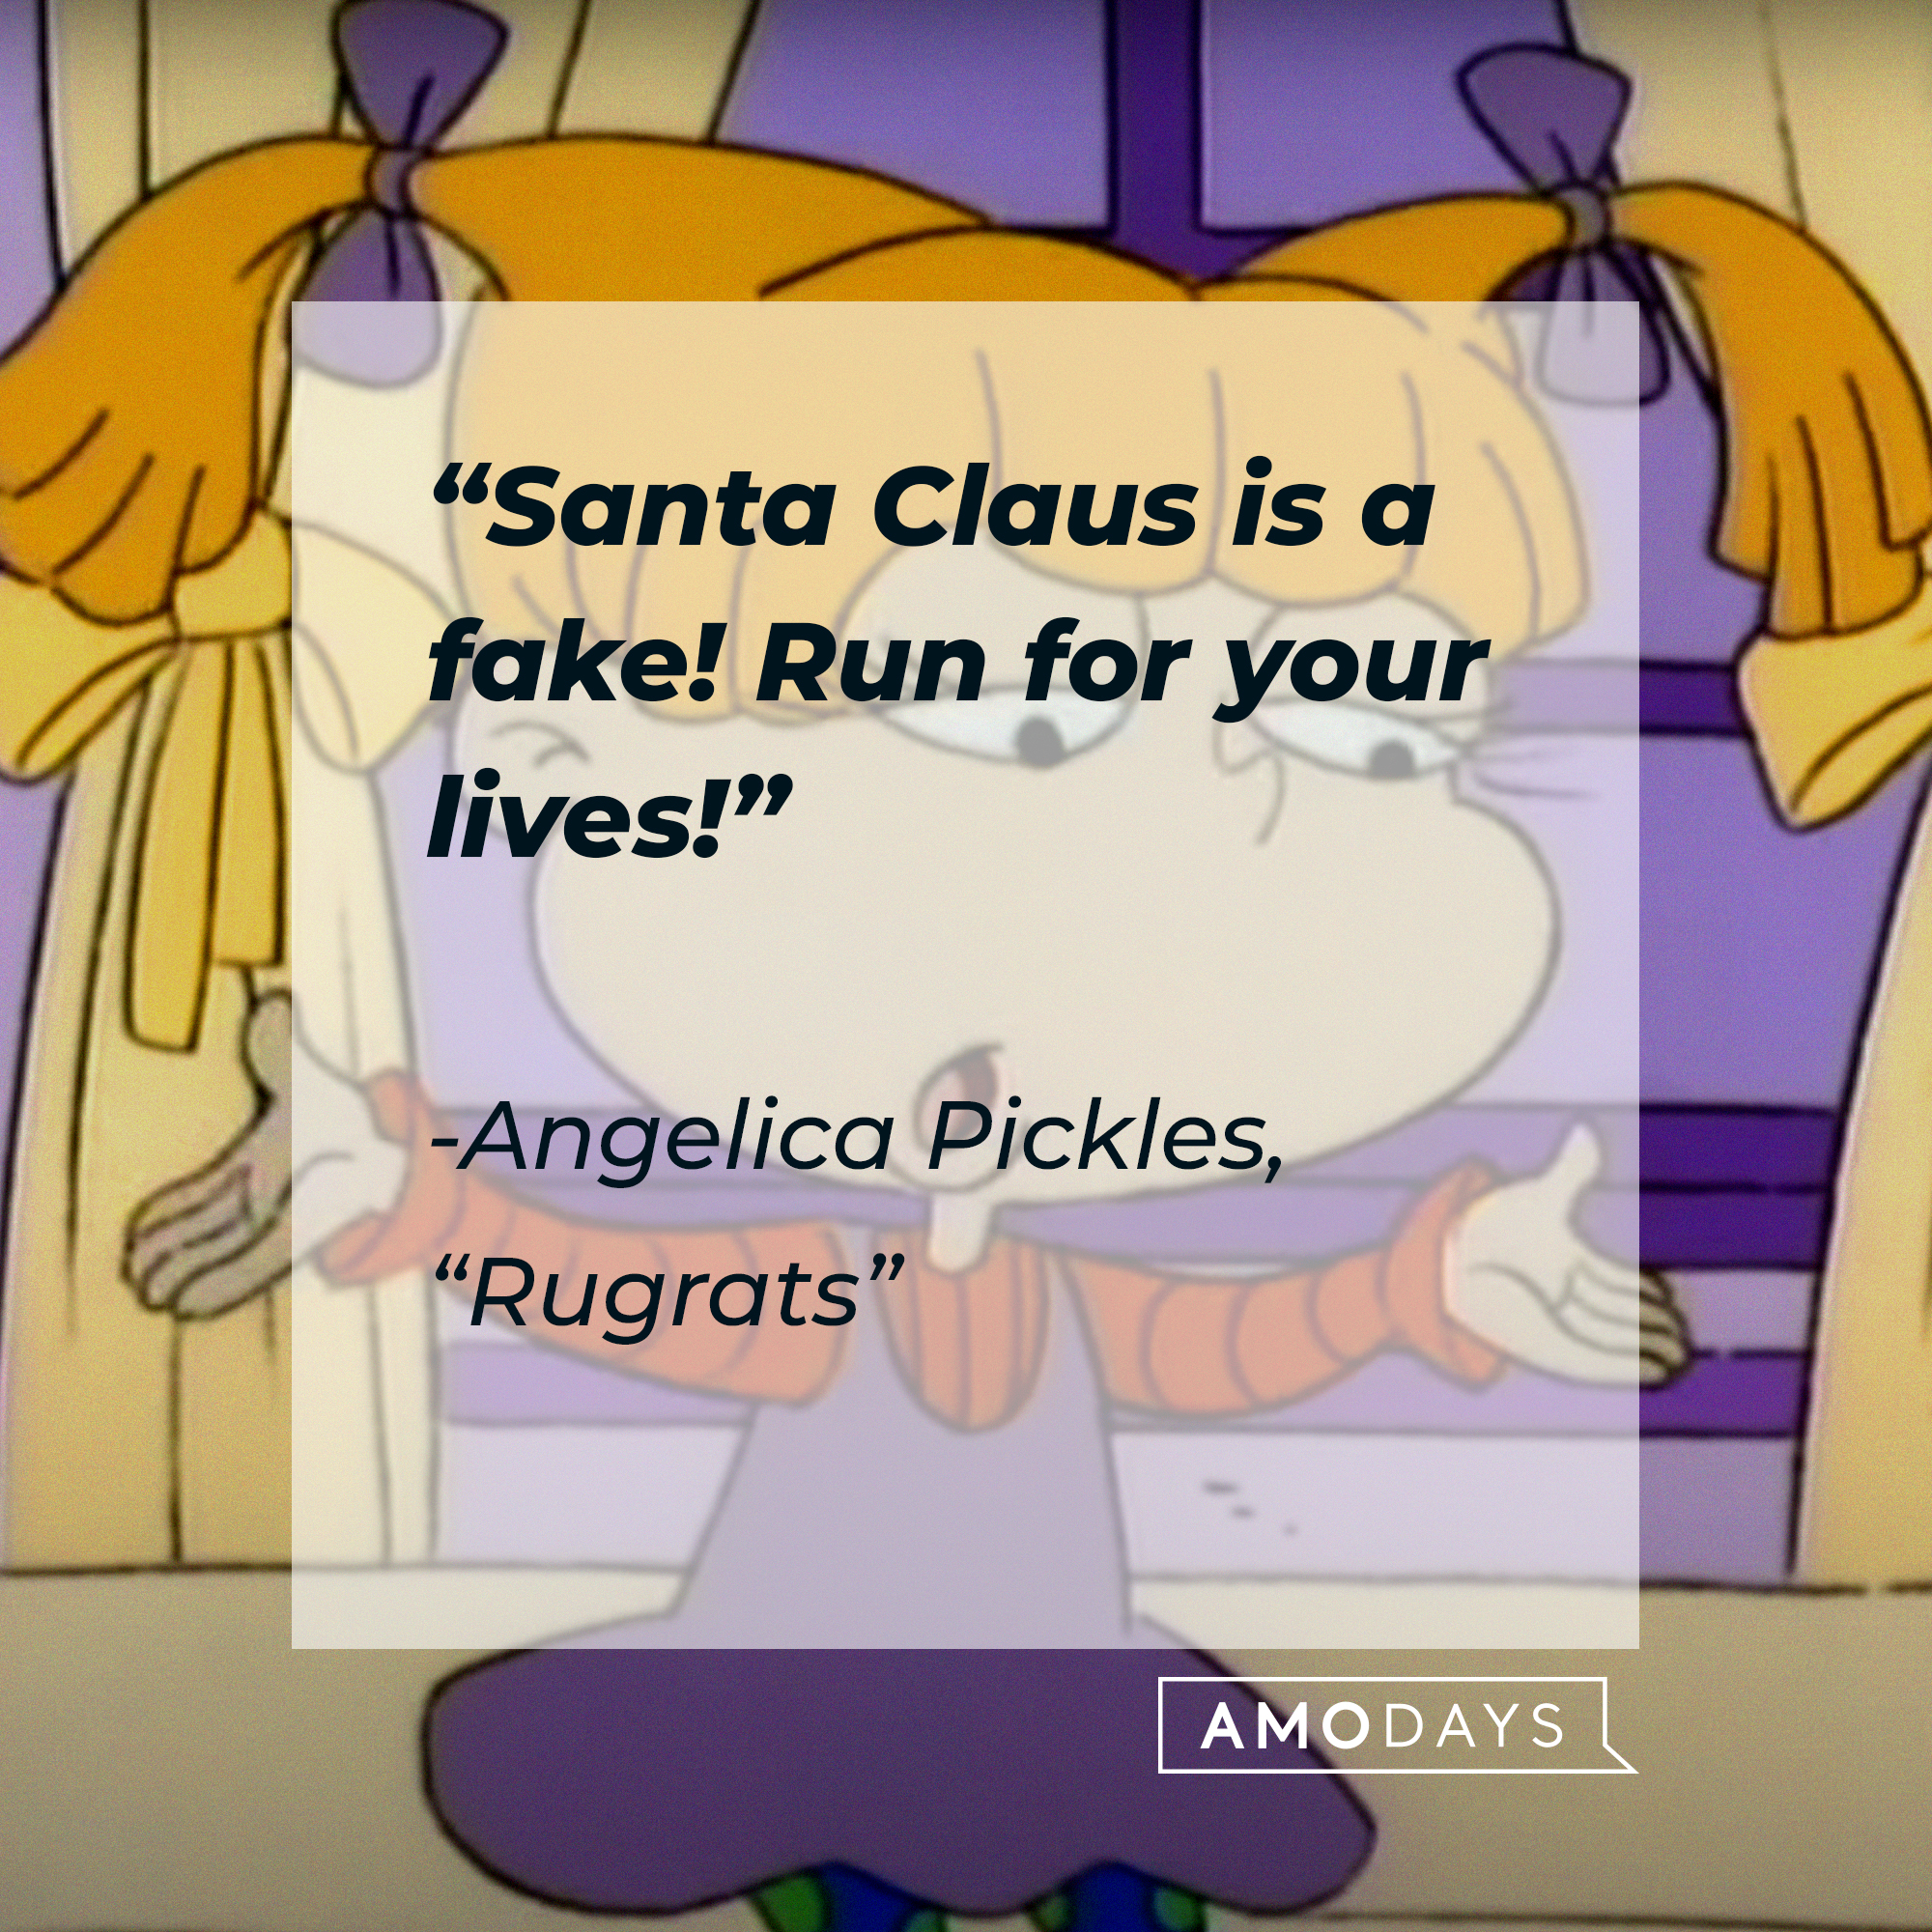 Angelica Pickles with her quote: "Santa Claus is a fake! Run for your lives!”  | Source: Facebook.com/Rugrats